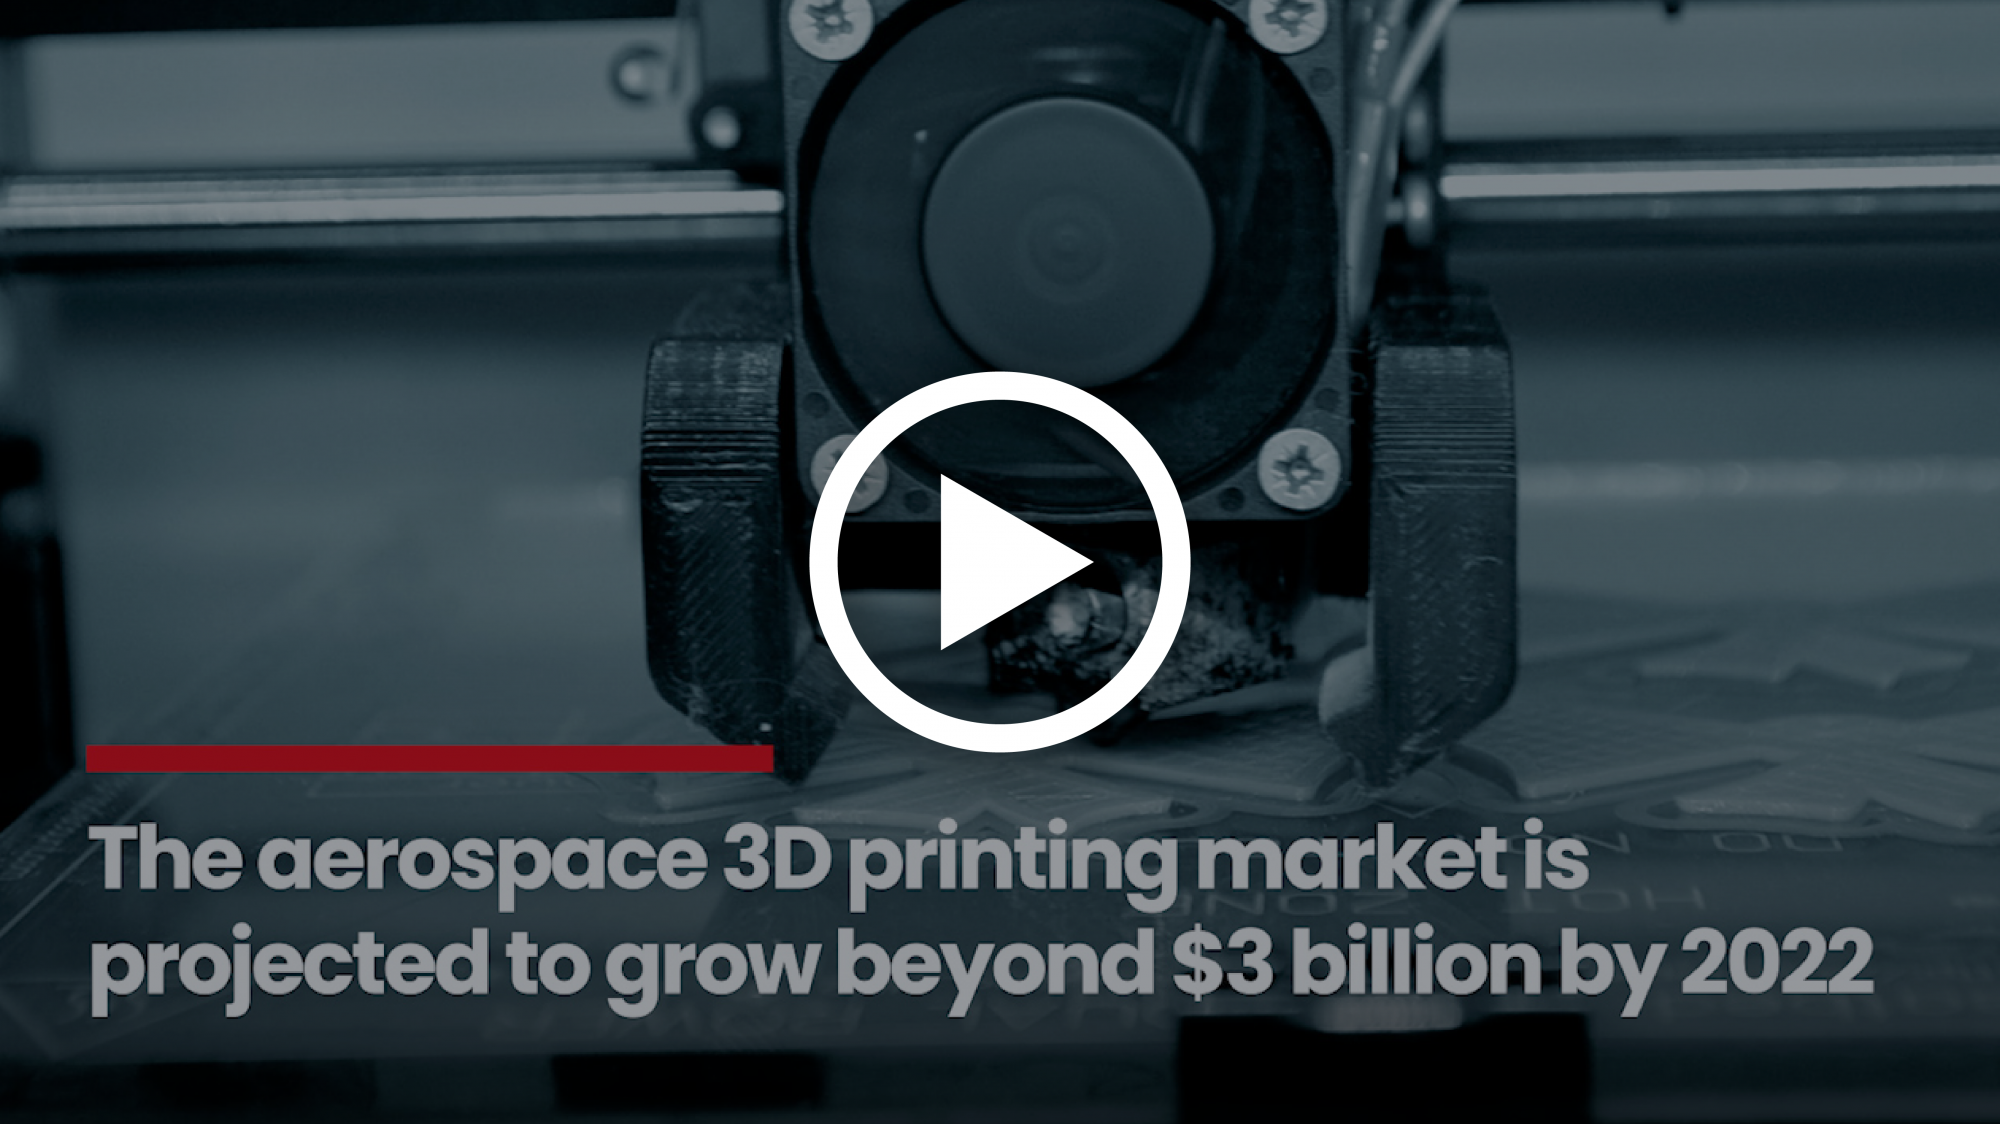 3D printing take aerospace to new heights